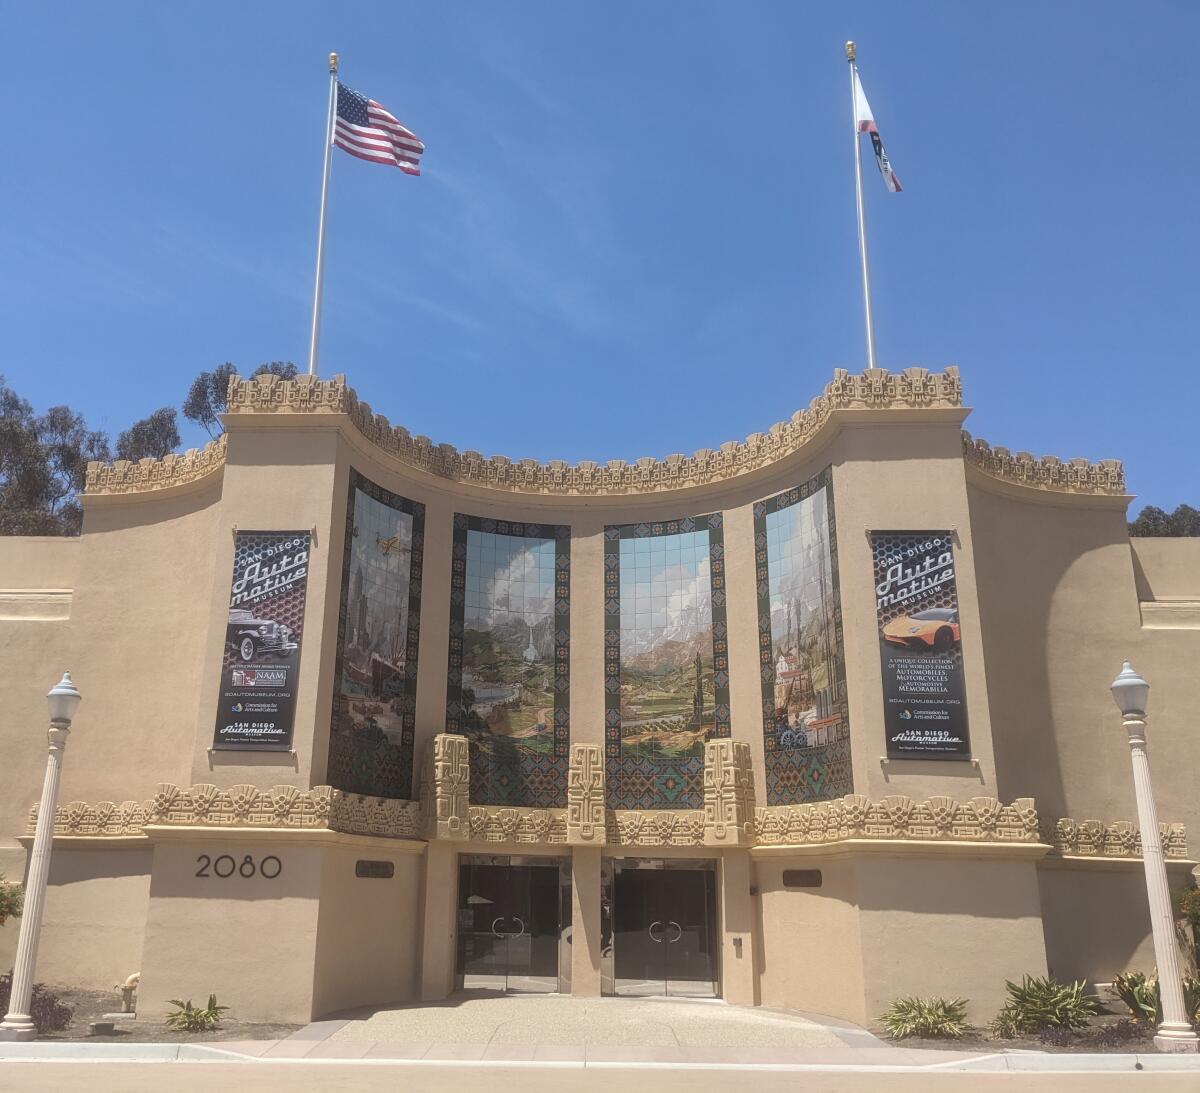 The entrance to the San Diego Automotive Museum